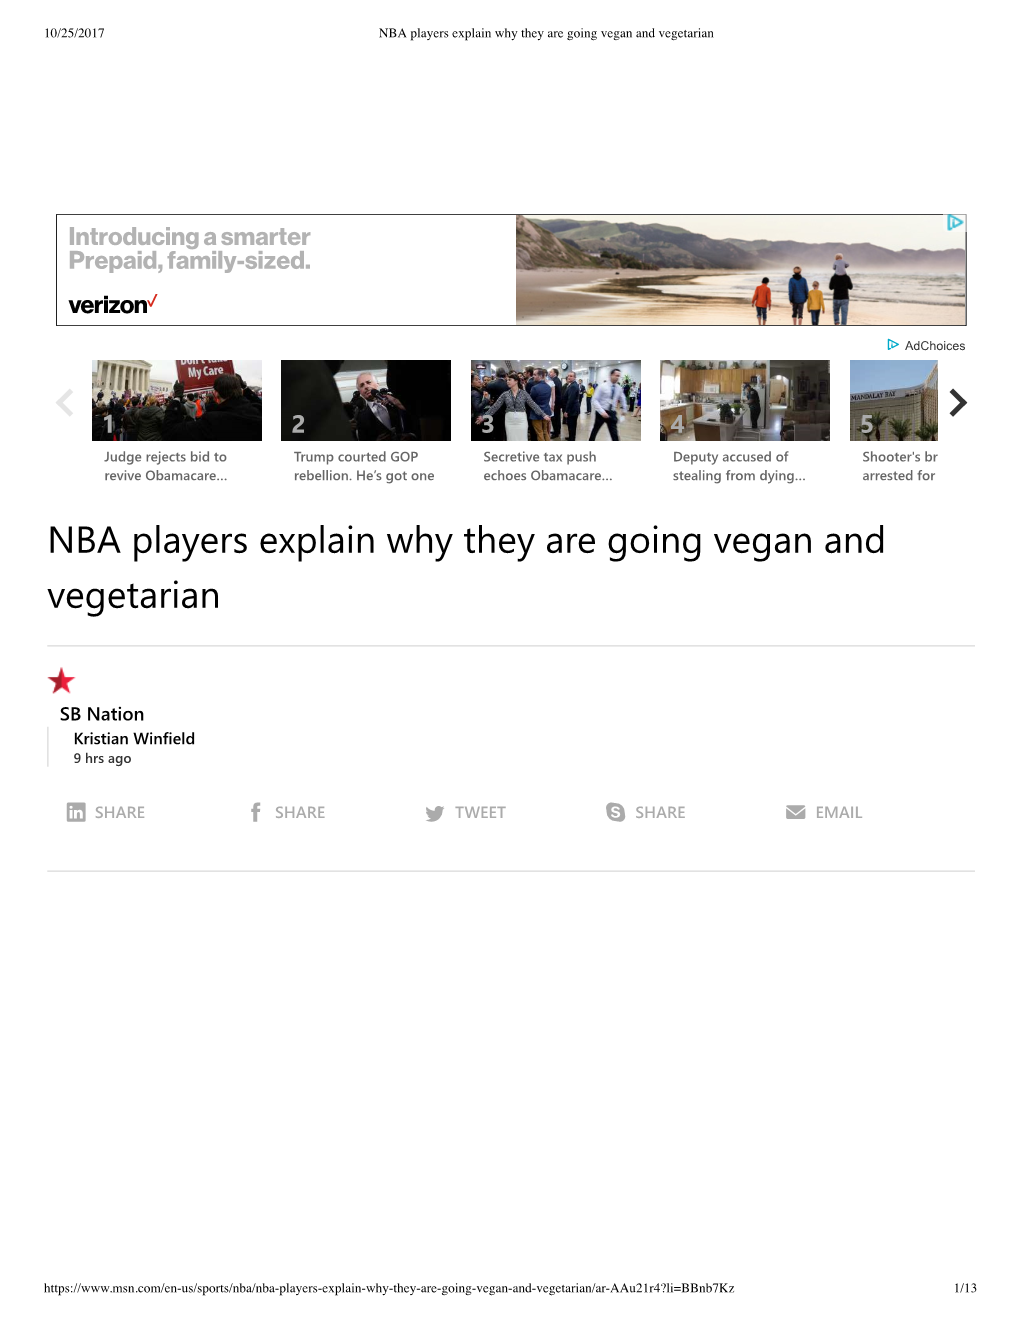 NBA Players Explain Why They Are Going Vegan and Vegetarian